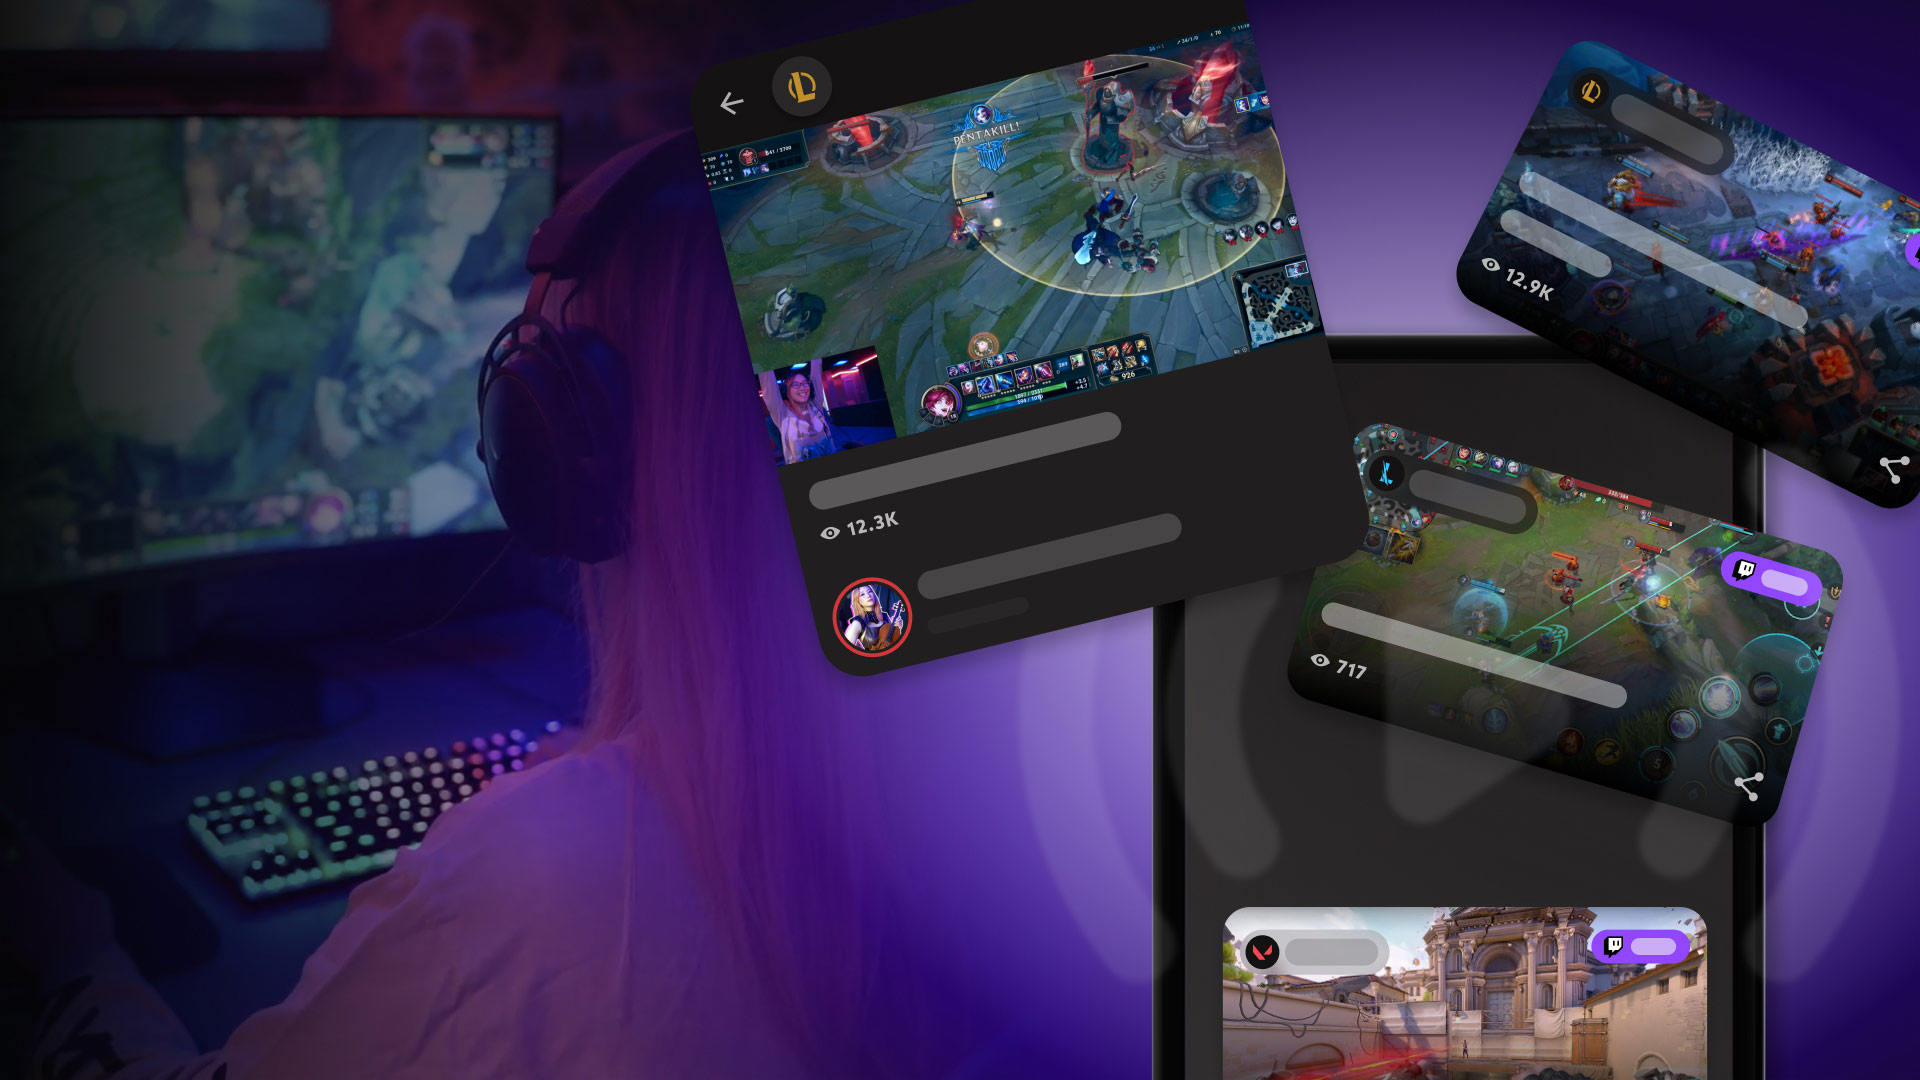 Gaming on the Go: The Mobile League of Legends Experience